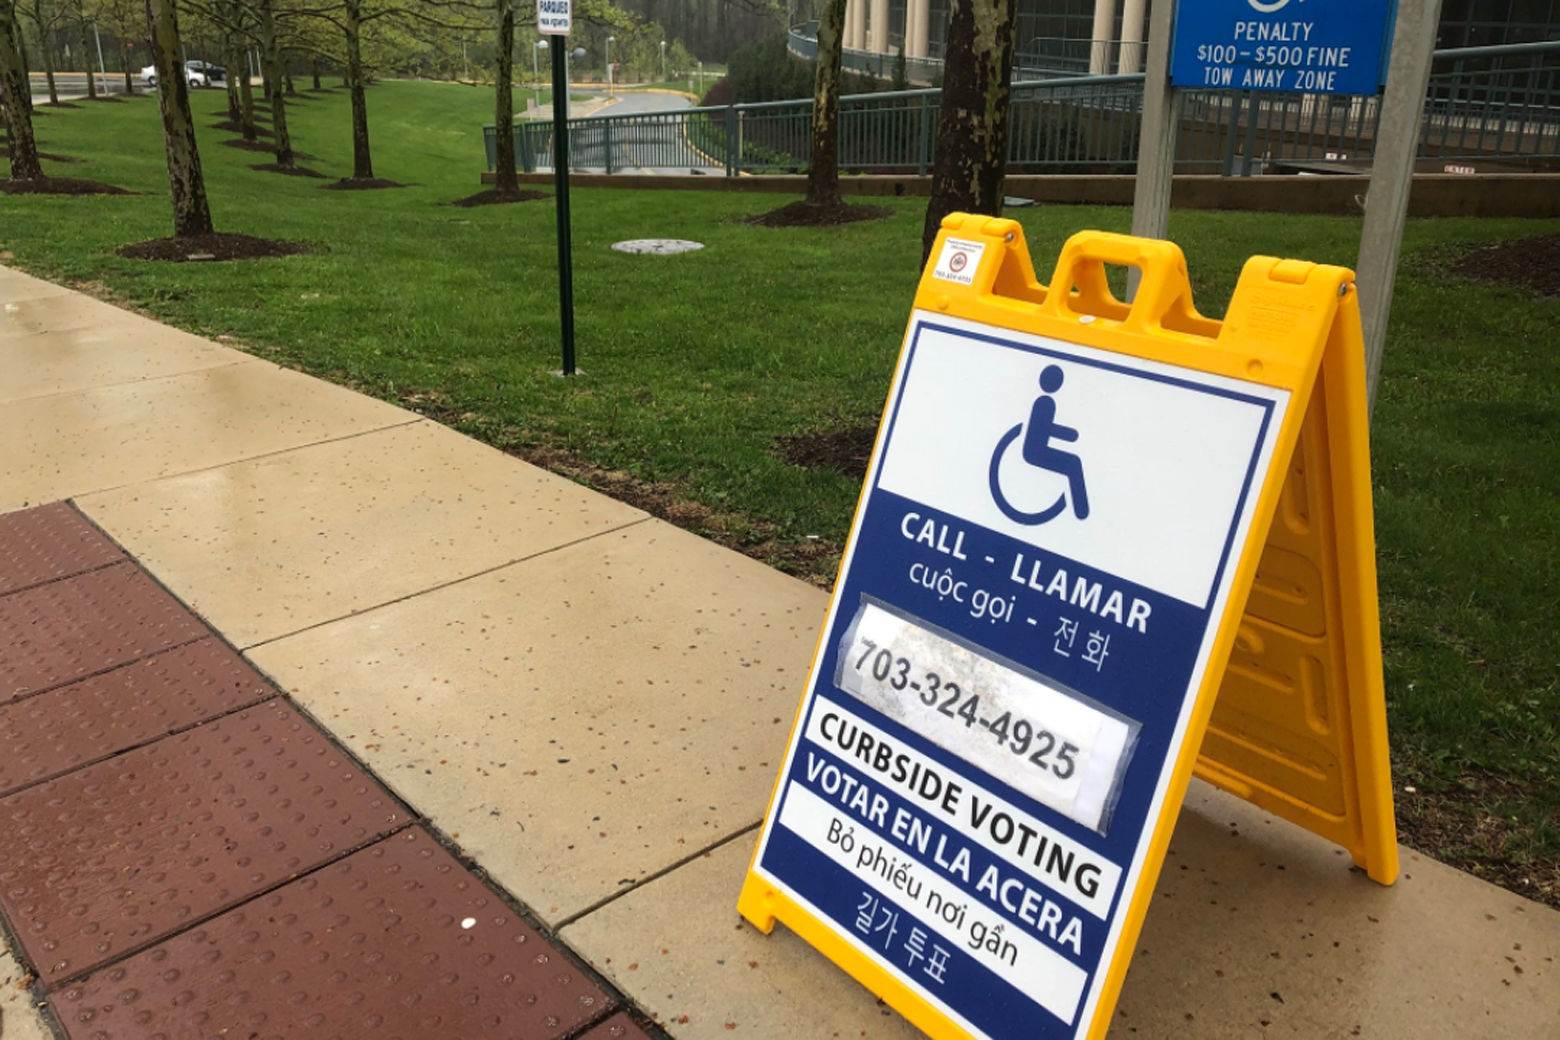 For those who need it, there is also curbside voting. (WTOP/Max Smith)